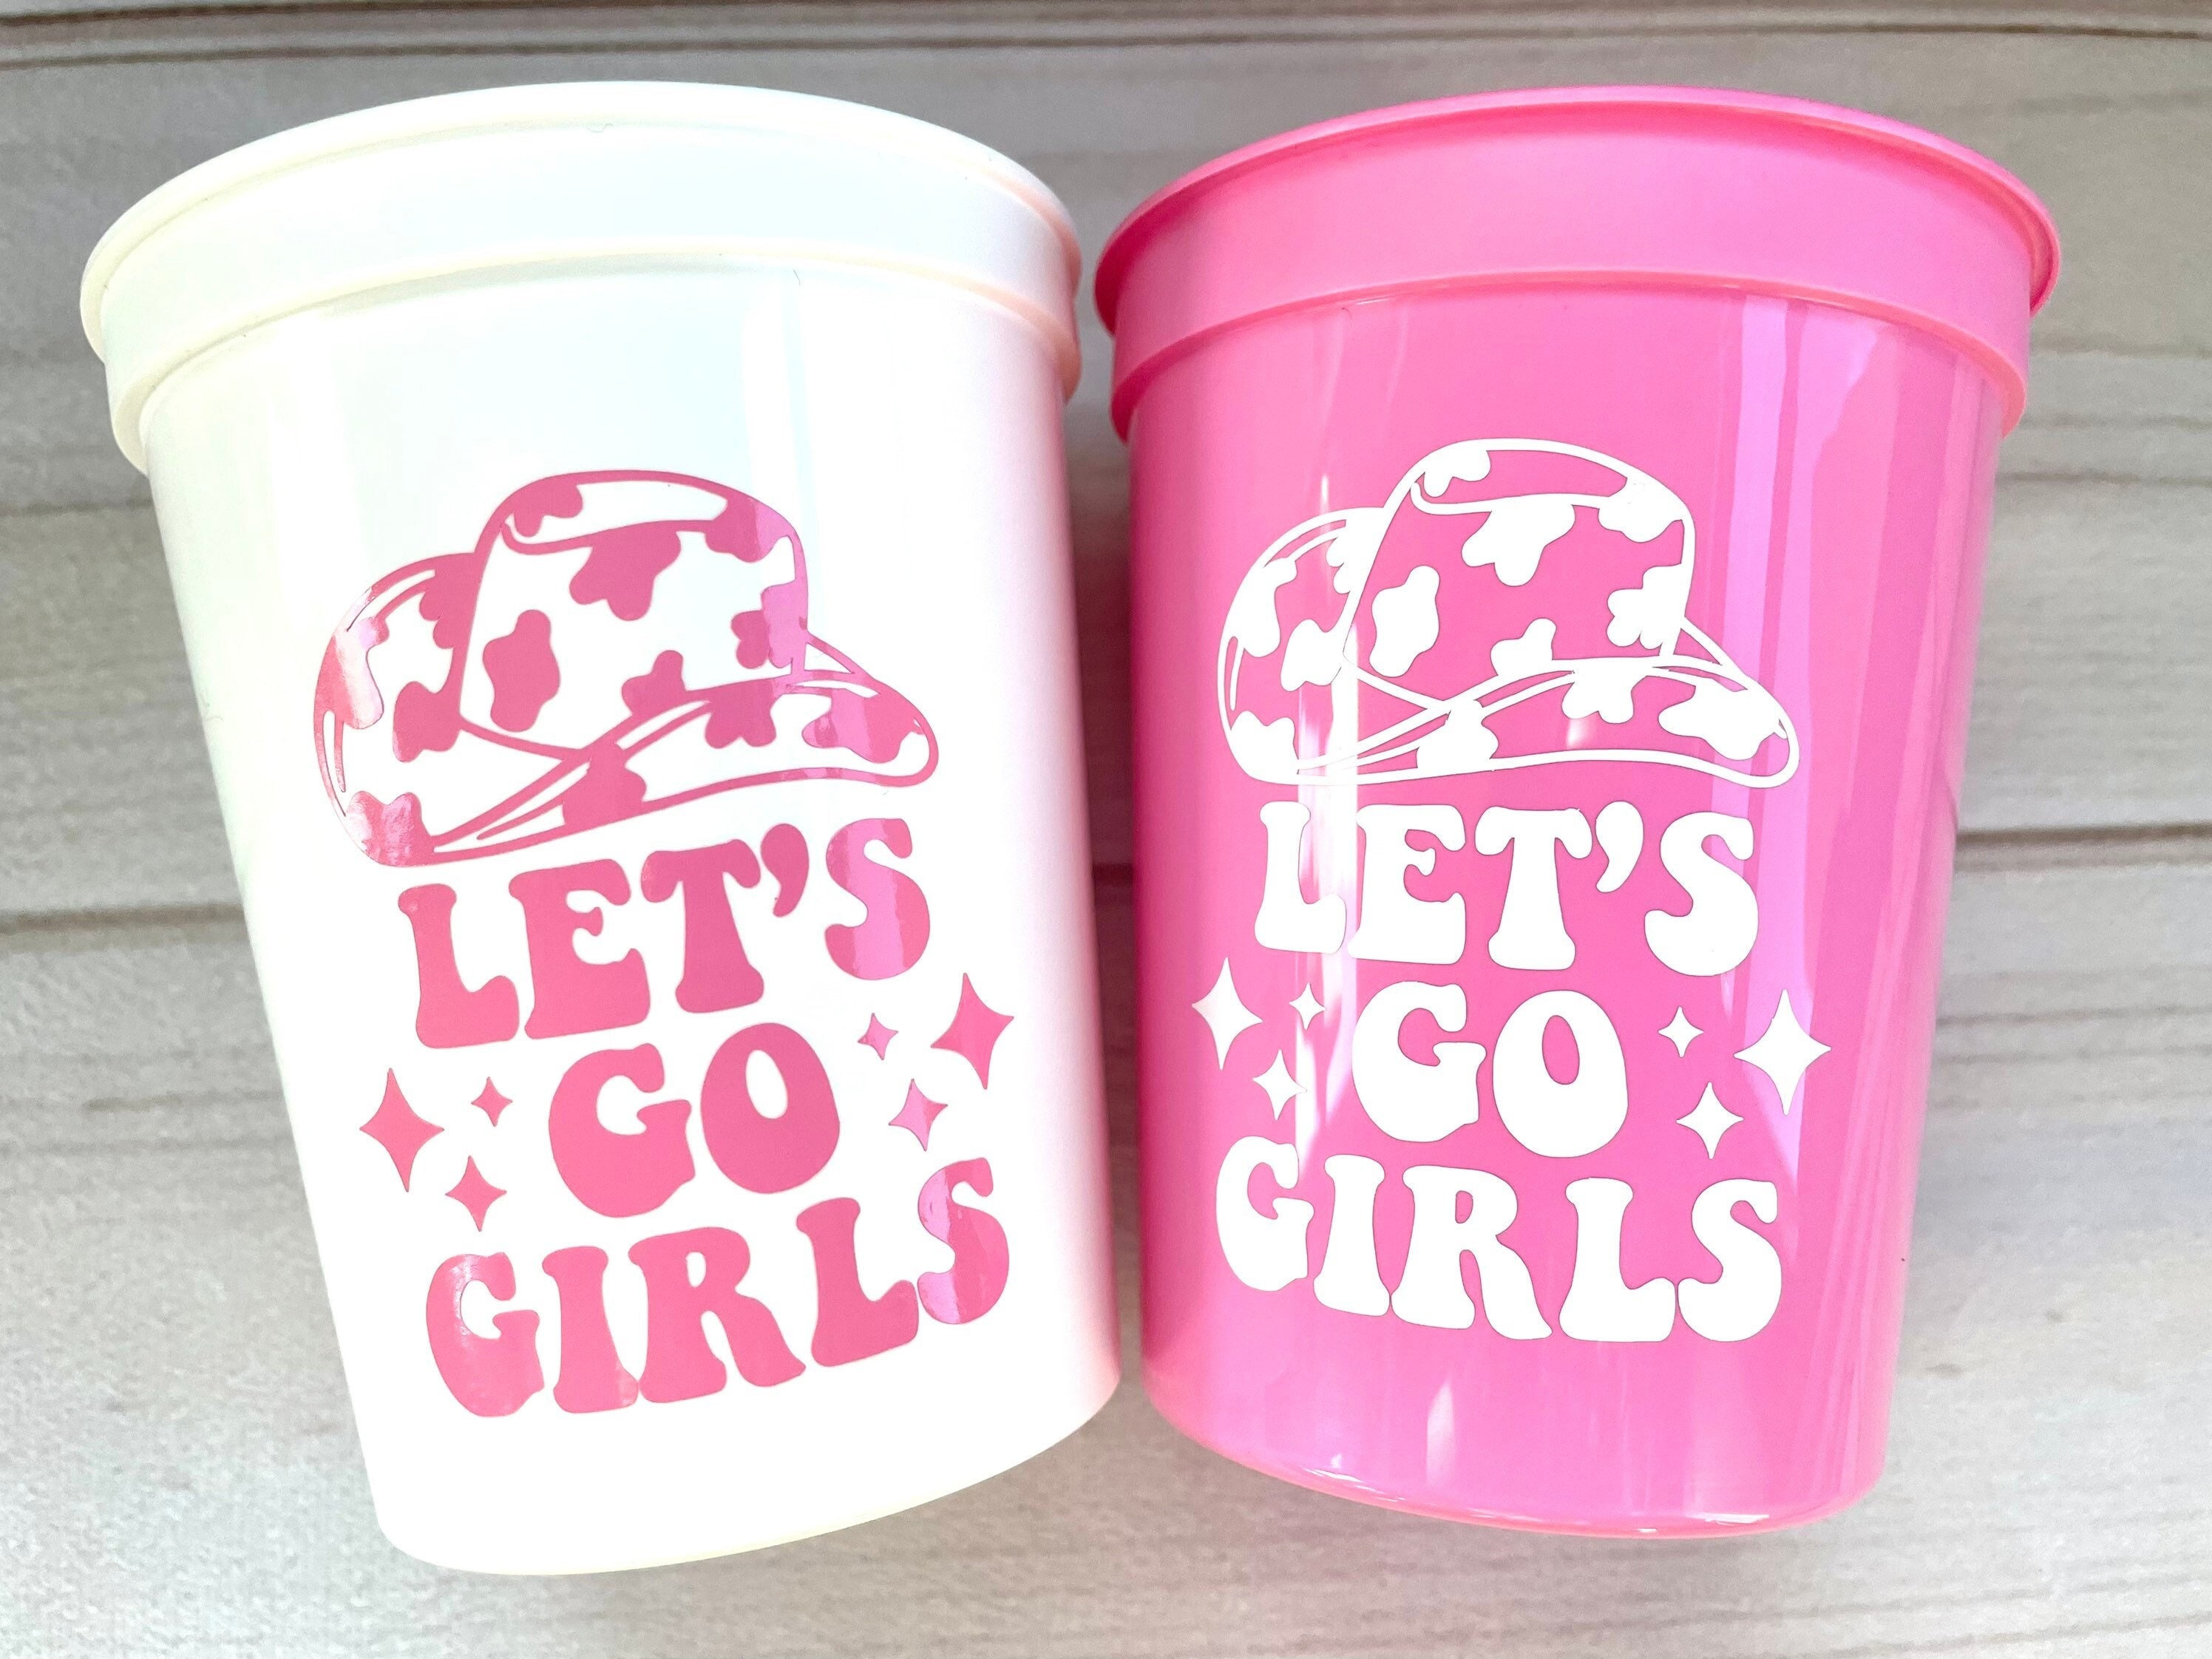 GOGO'S 12 oz Tumbler 5 PK - Kid Cups With Lids and Straws